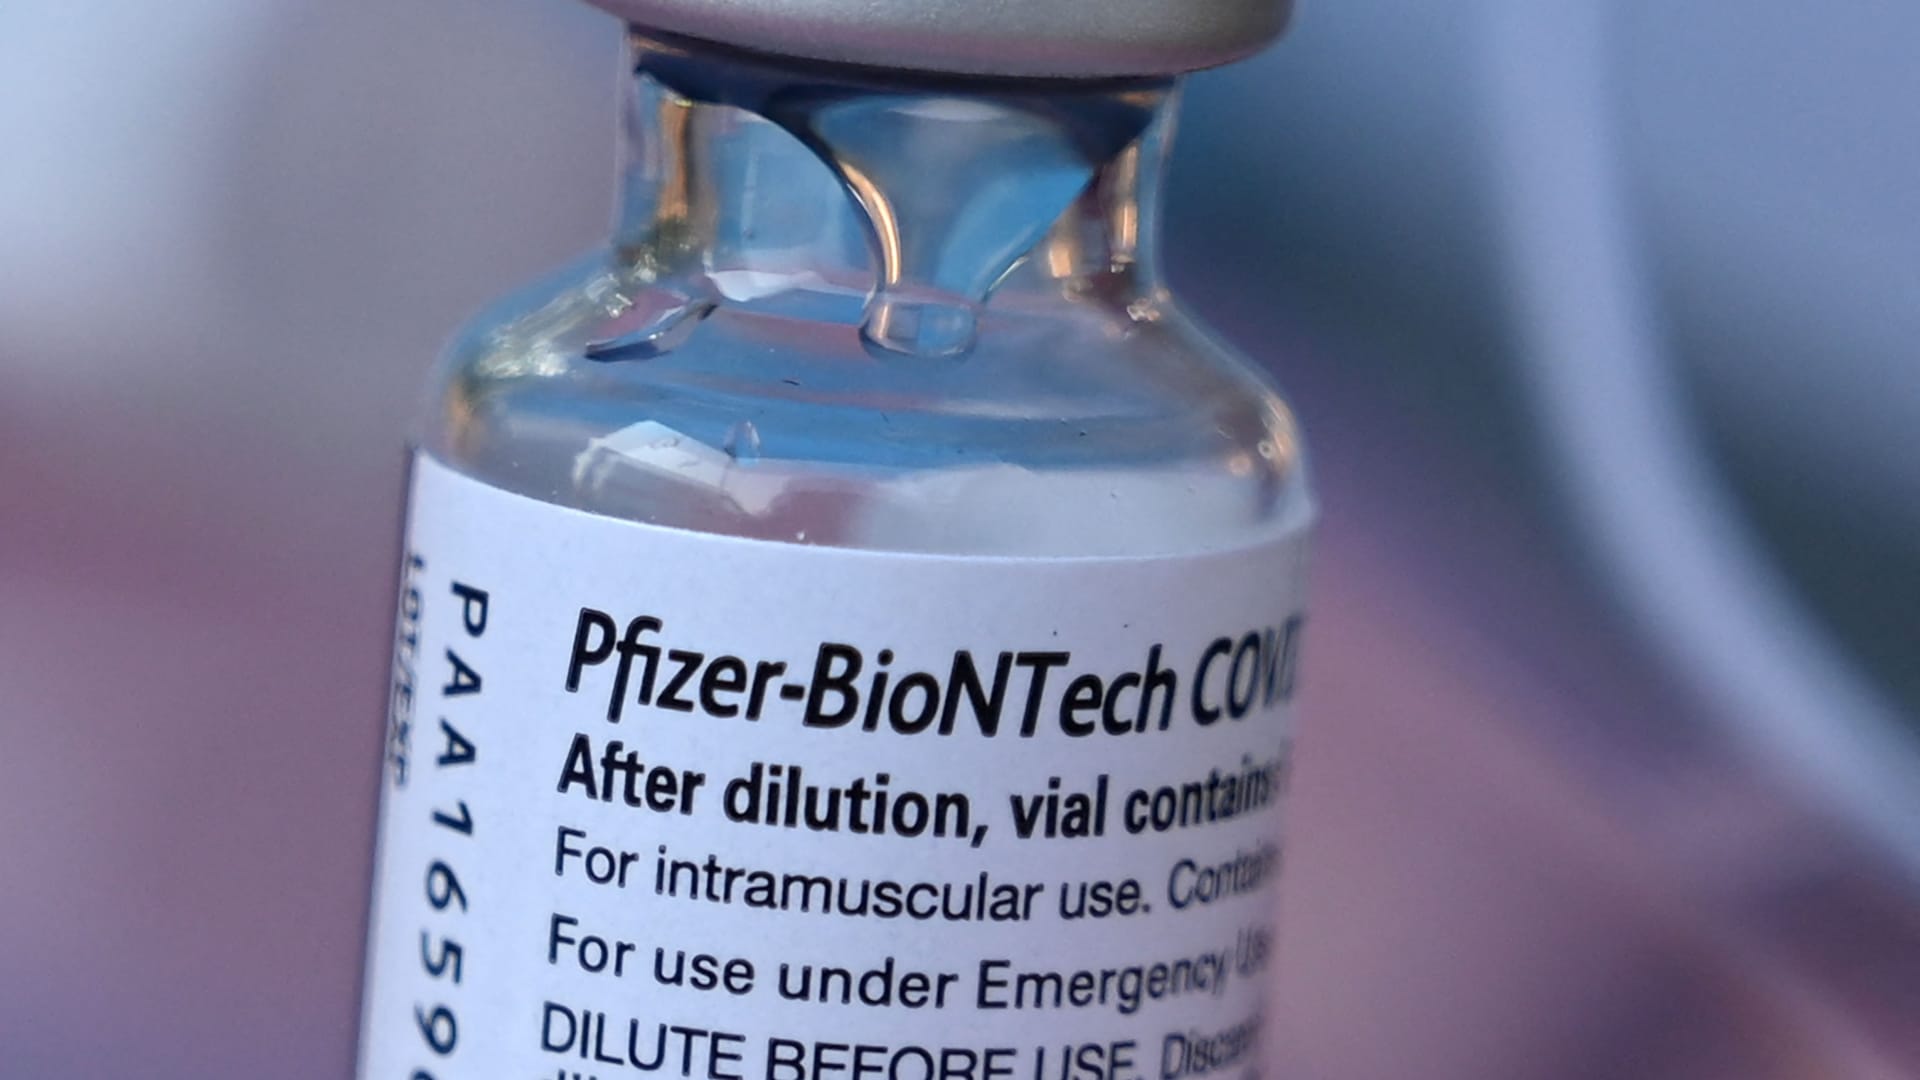 A vial of Pfizer-BioNTech Covid-19 vaccine is seen at a pop up vaccine clinic in the Arleta neighborhood of Los Angeles, California, August 23, 2021.